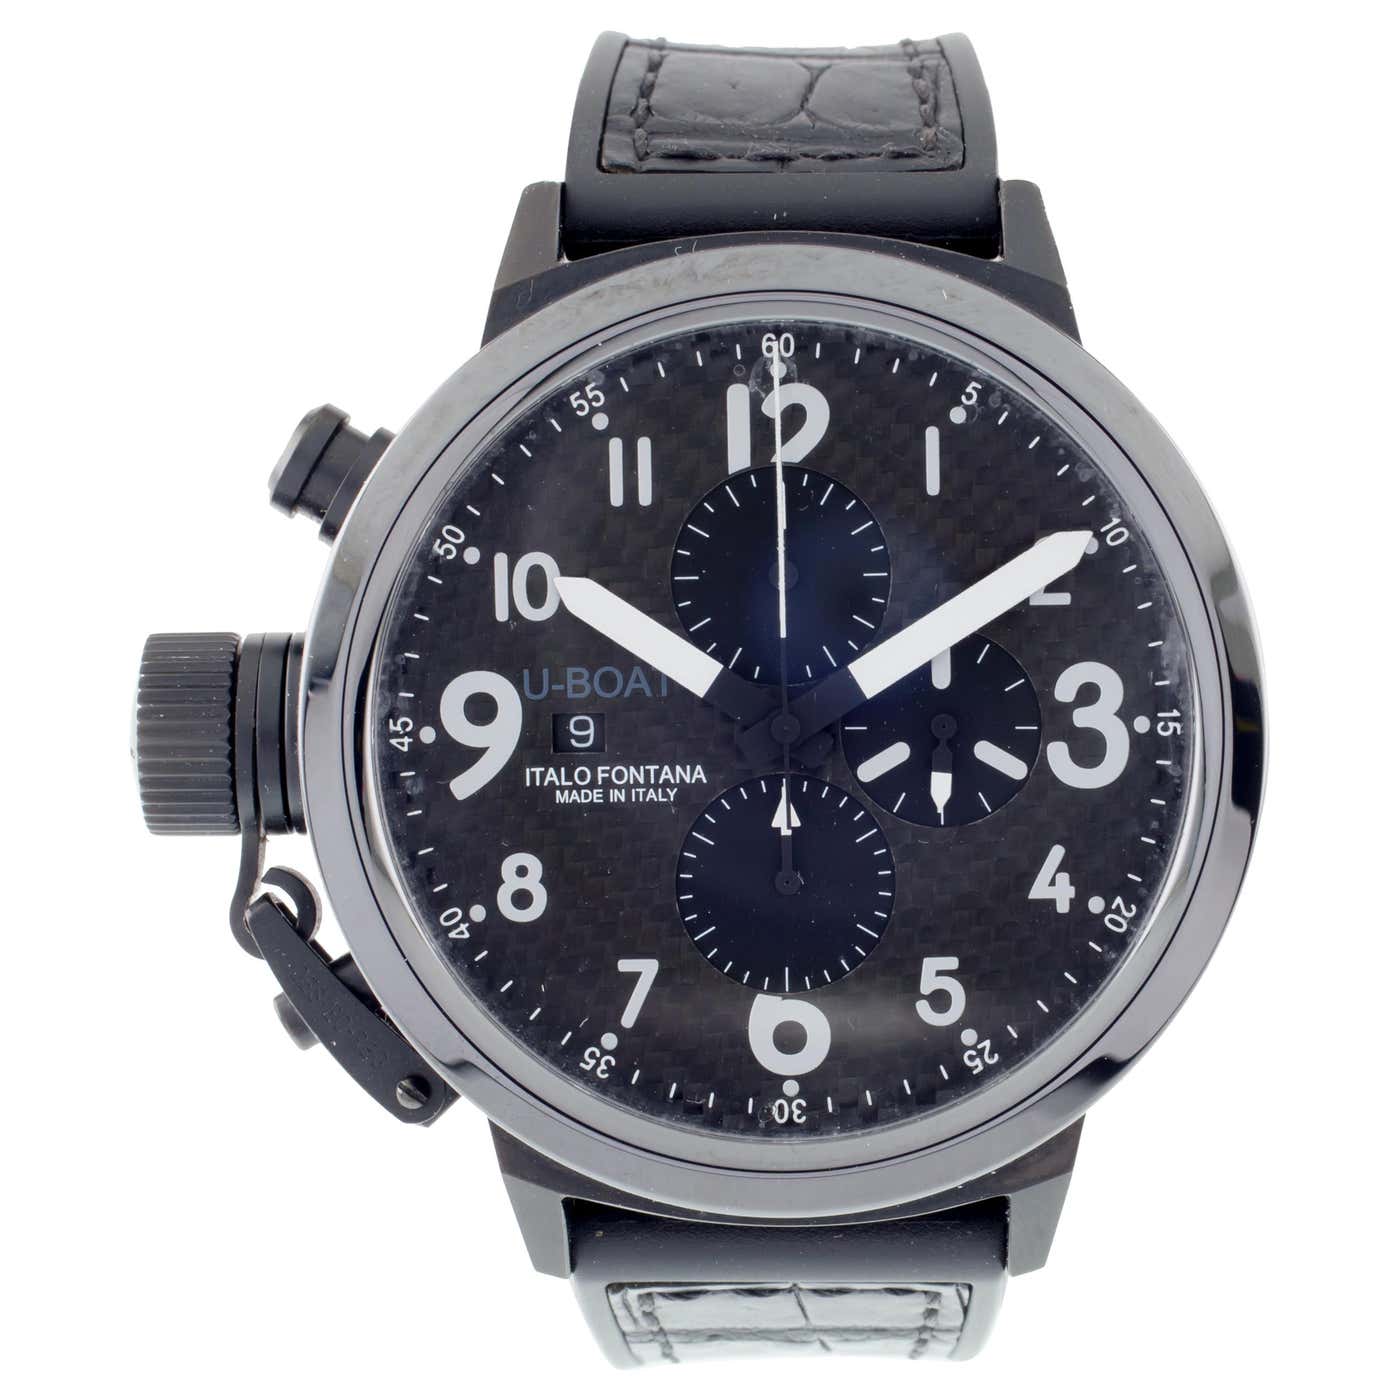 U-Boat Flightdeck Men's Automatic Chronograph Watch with Carbon Dial ...